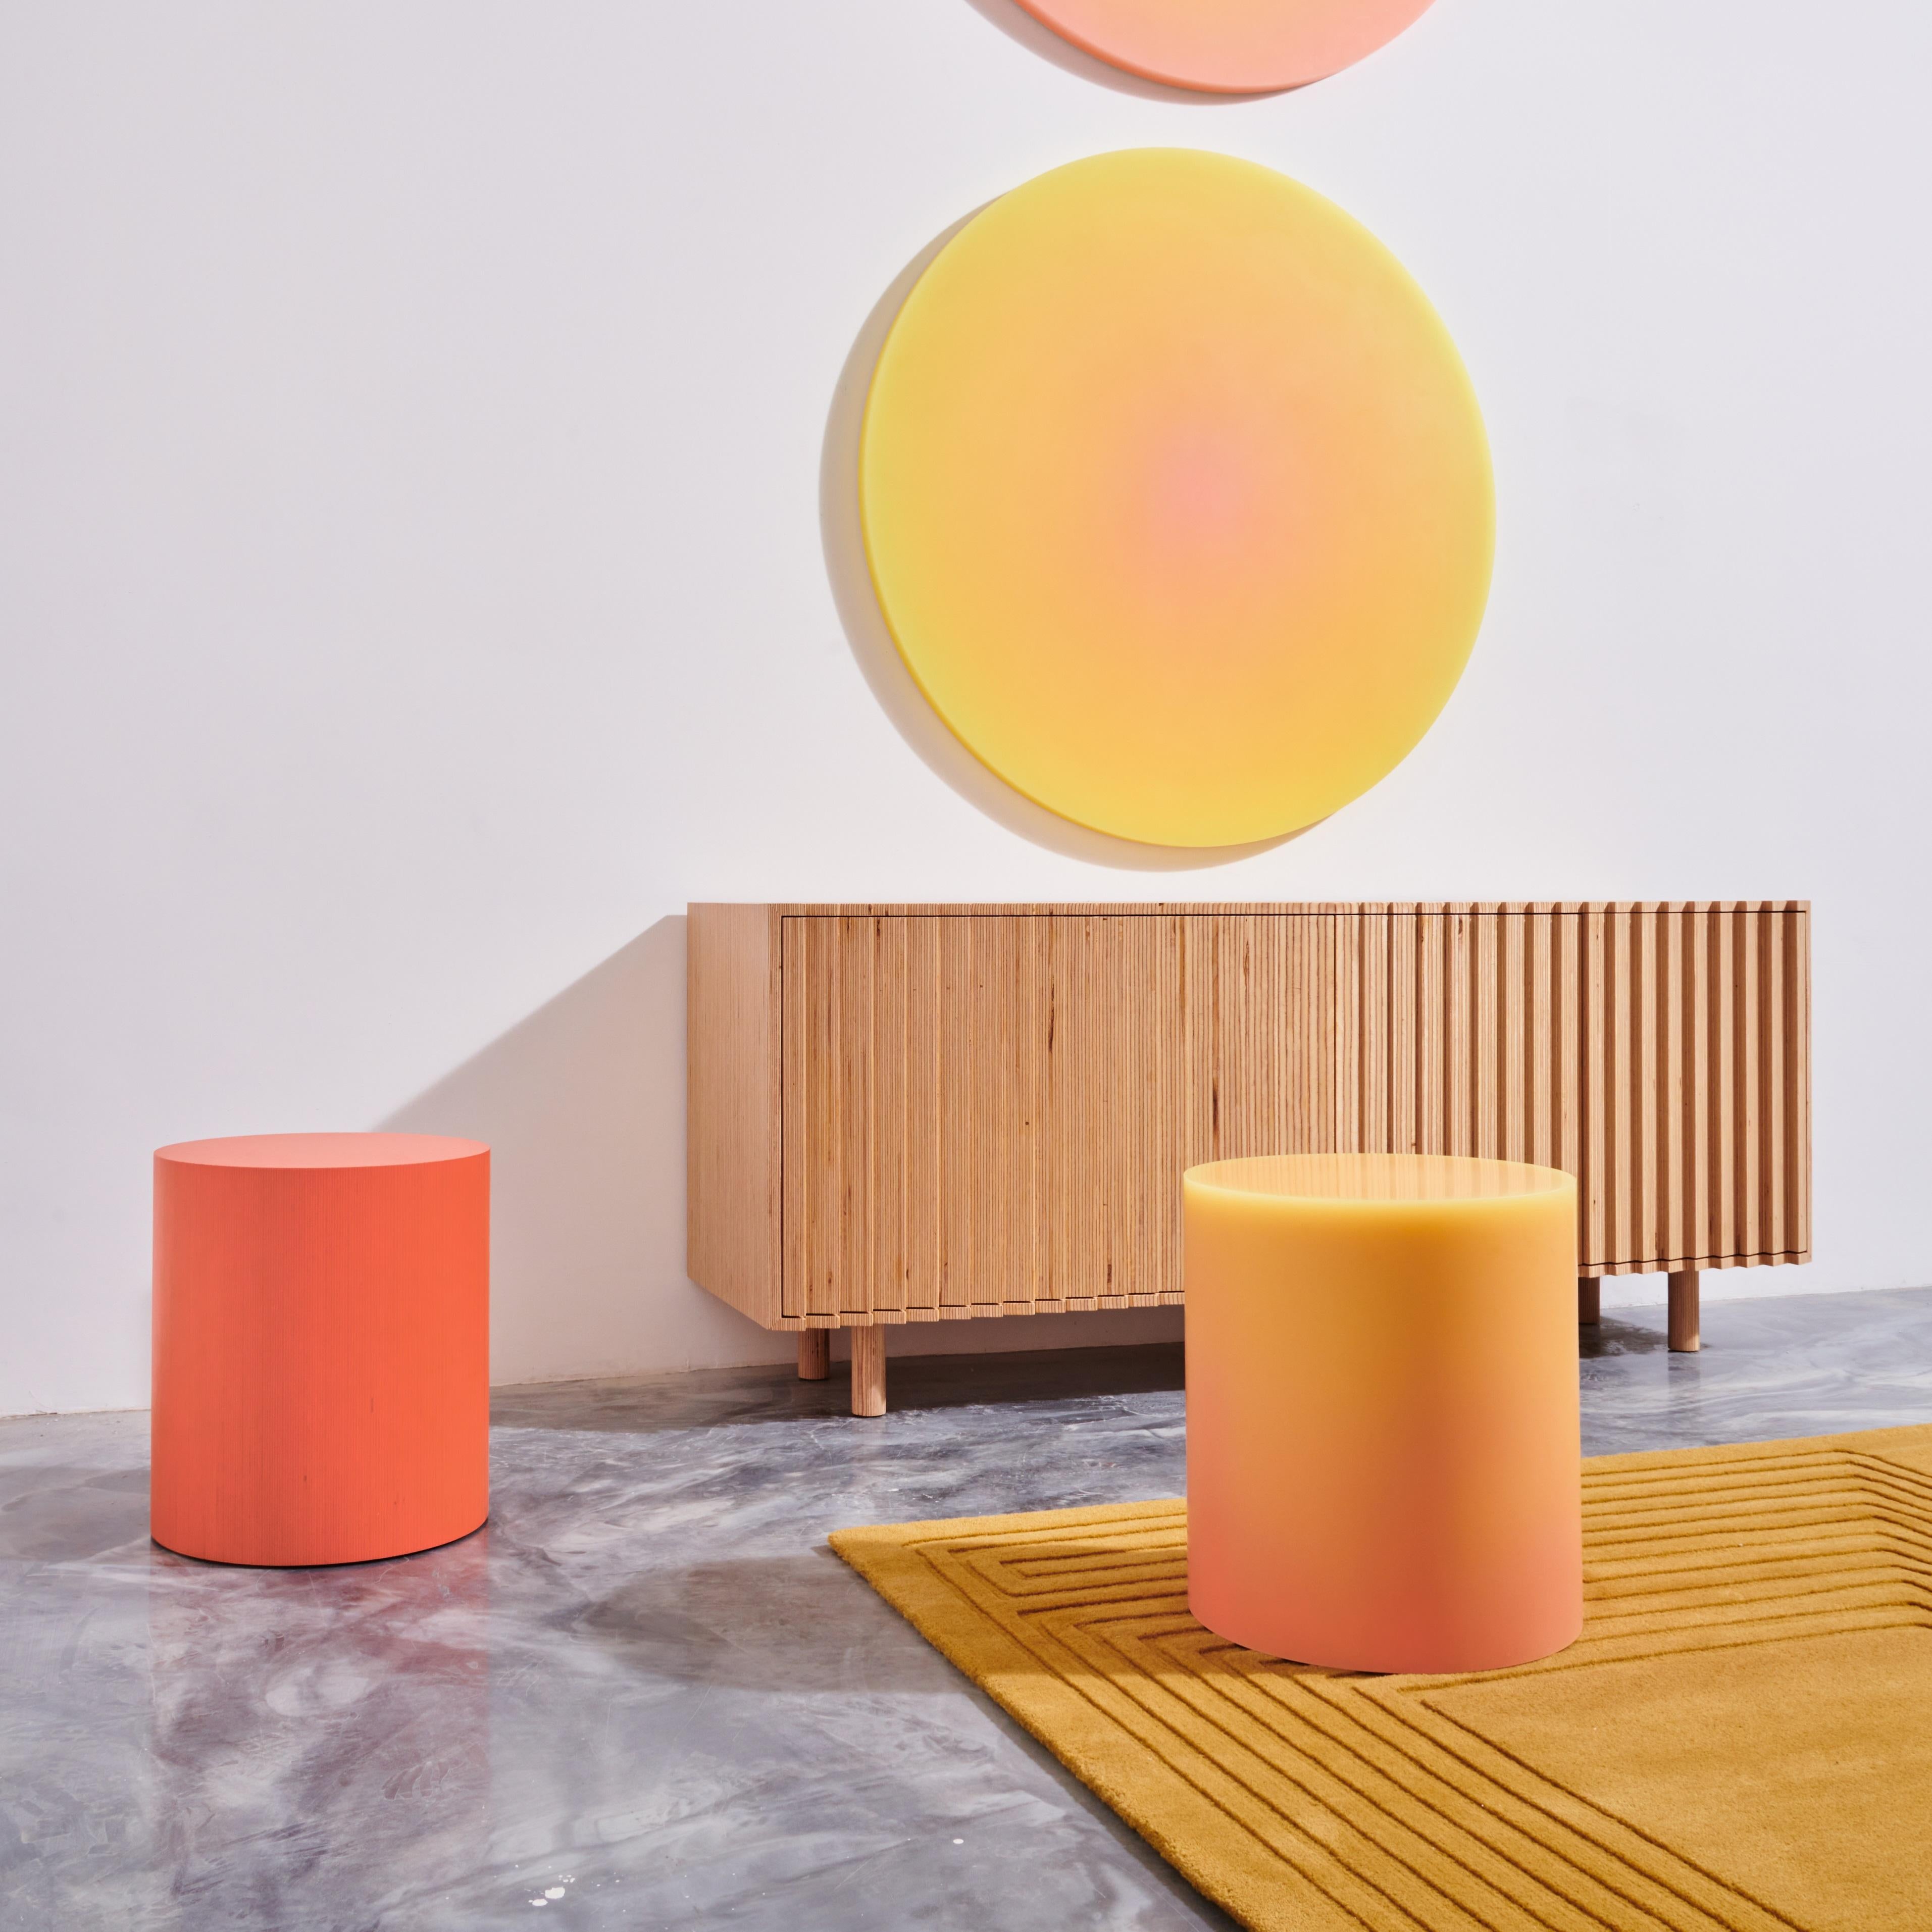 Large circular wall object features a warm hue transitioning from beige to peach. The shifting saturation levels create subtle changes in the way light is refracted from within. The exterior facets are sanded to a smooth-as-glass finish.